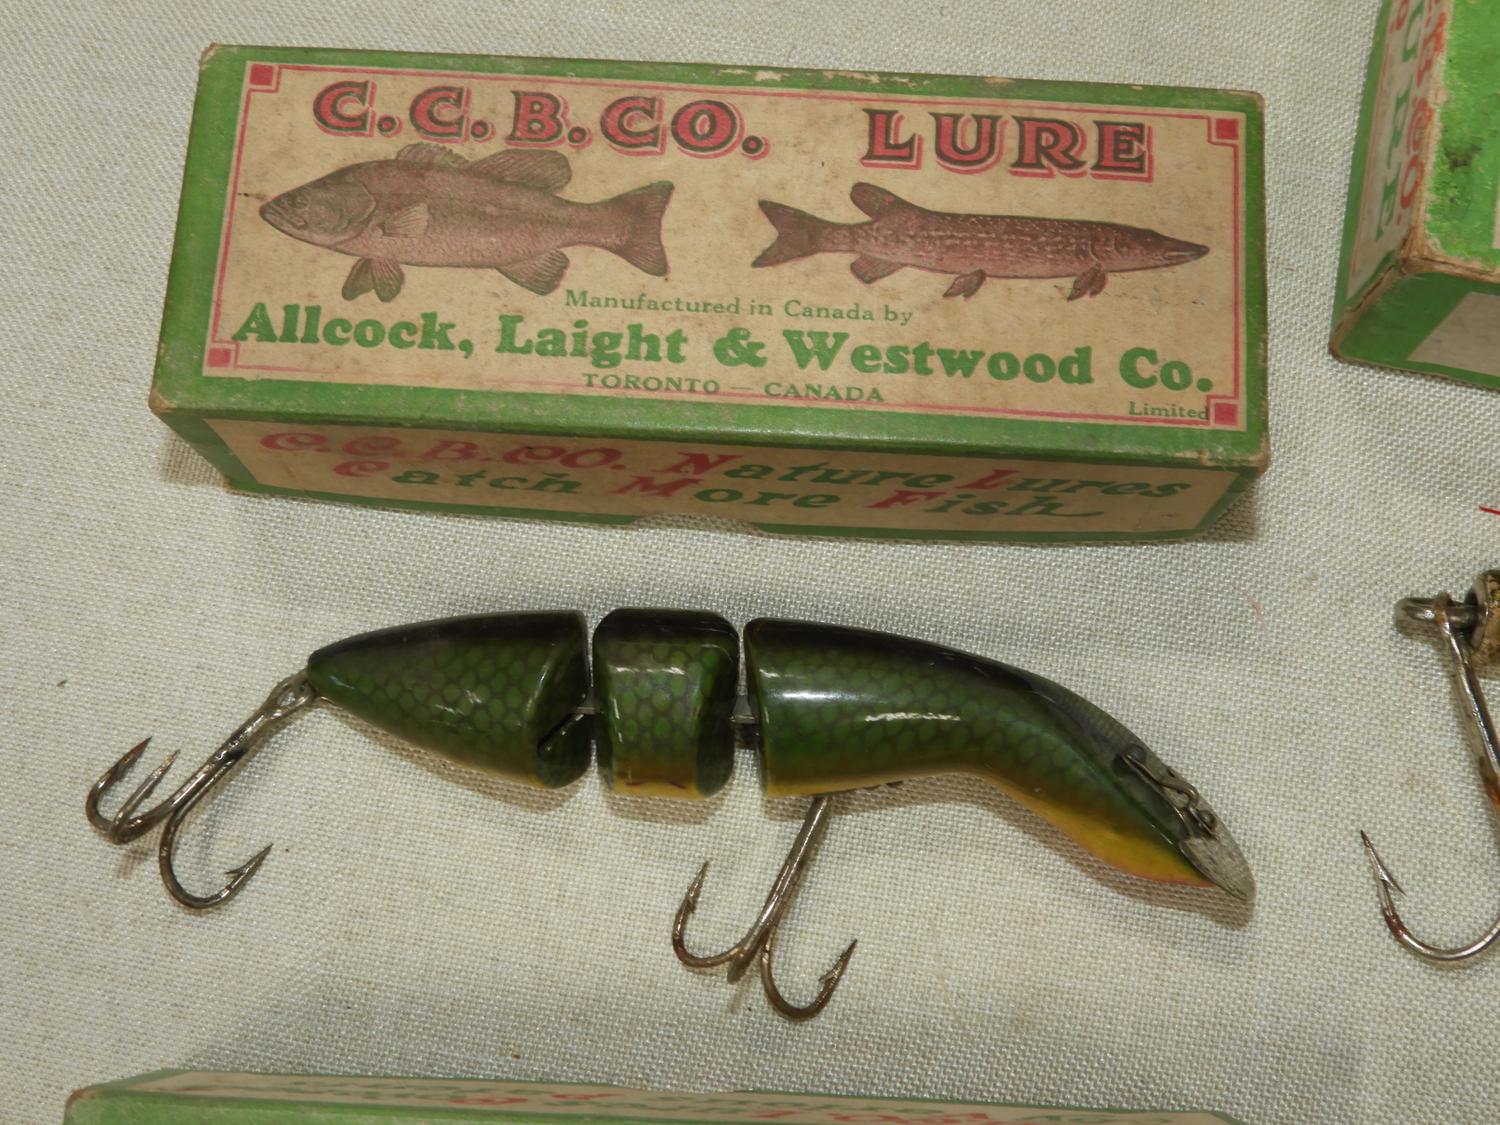 Vintage Fishing Lures / Sold by Numbers / Large Lot of 42 / Most